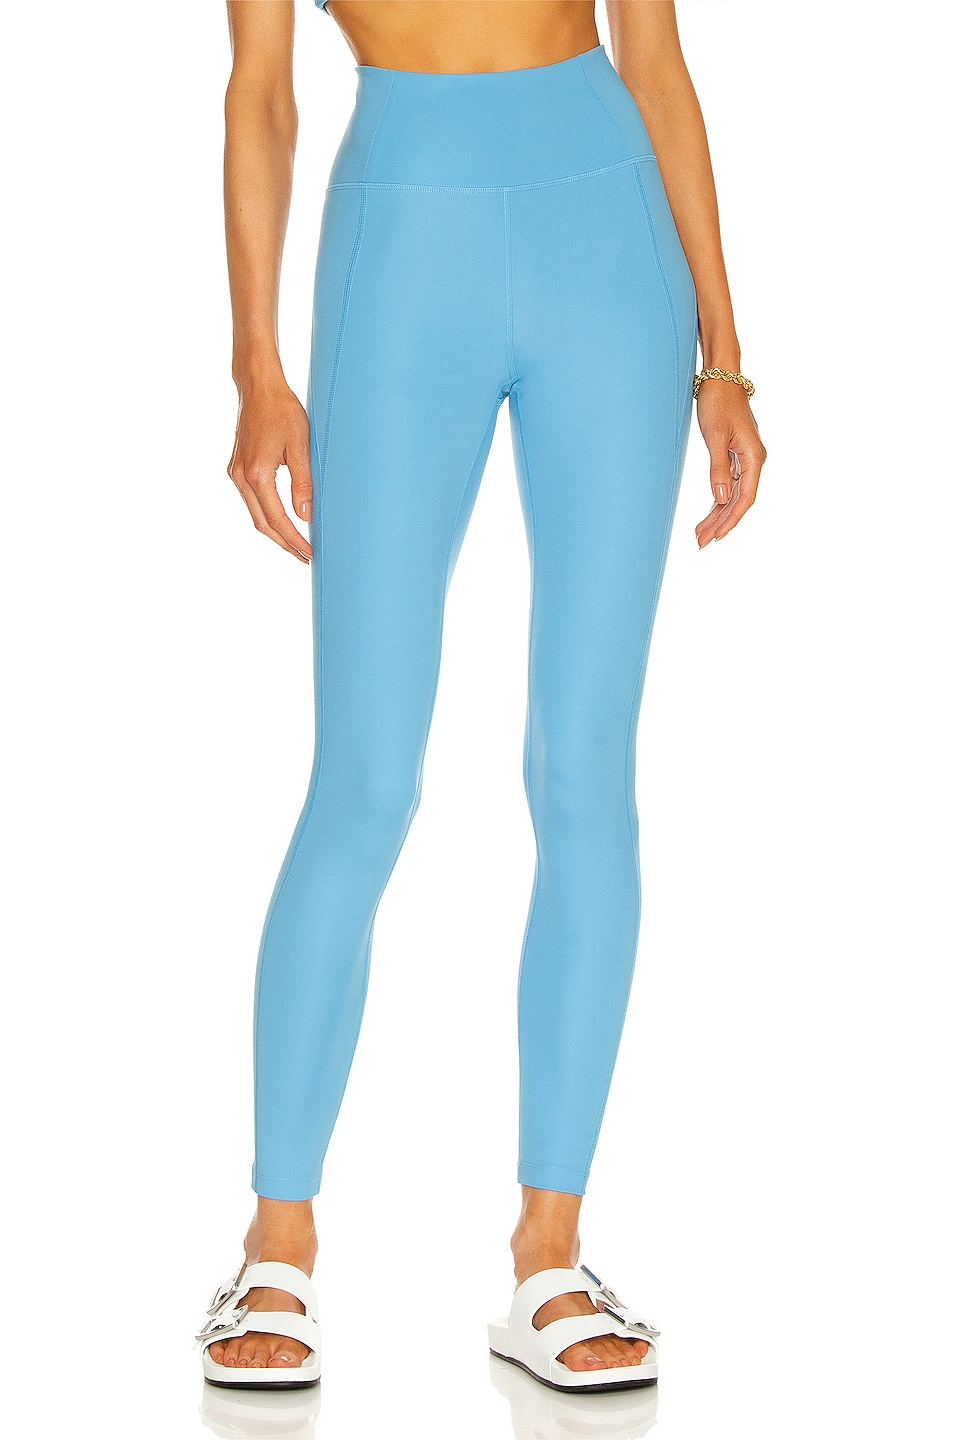 Image 1 of Girlfriend Collective High Rise Compressive Legging in Haze